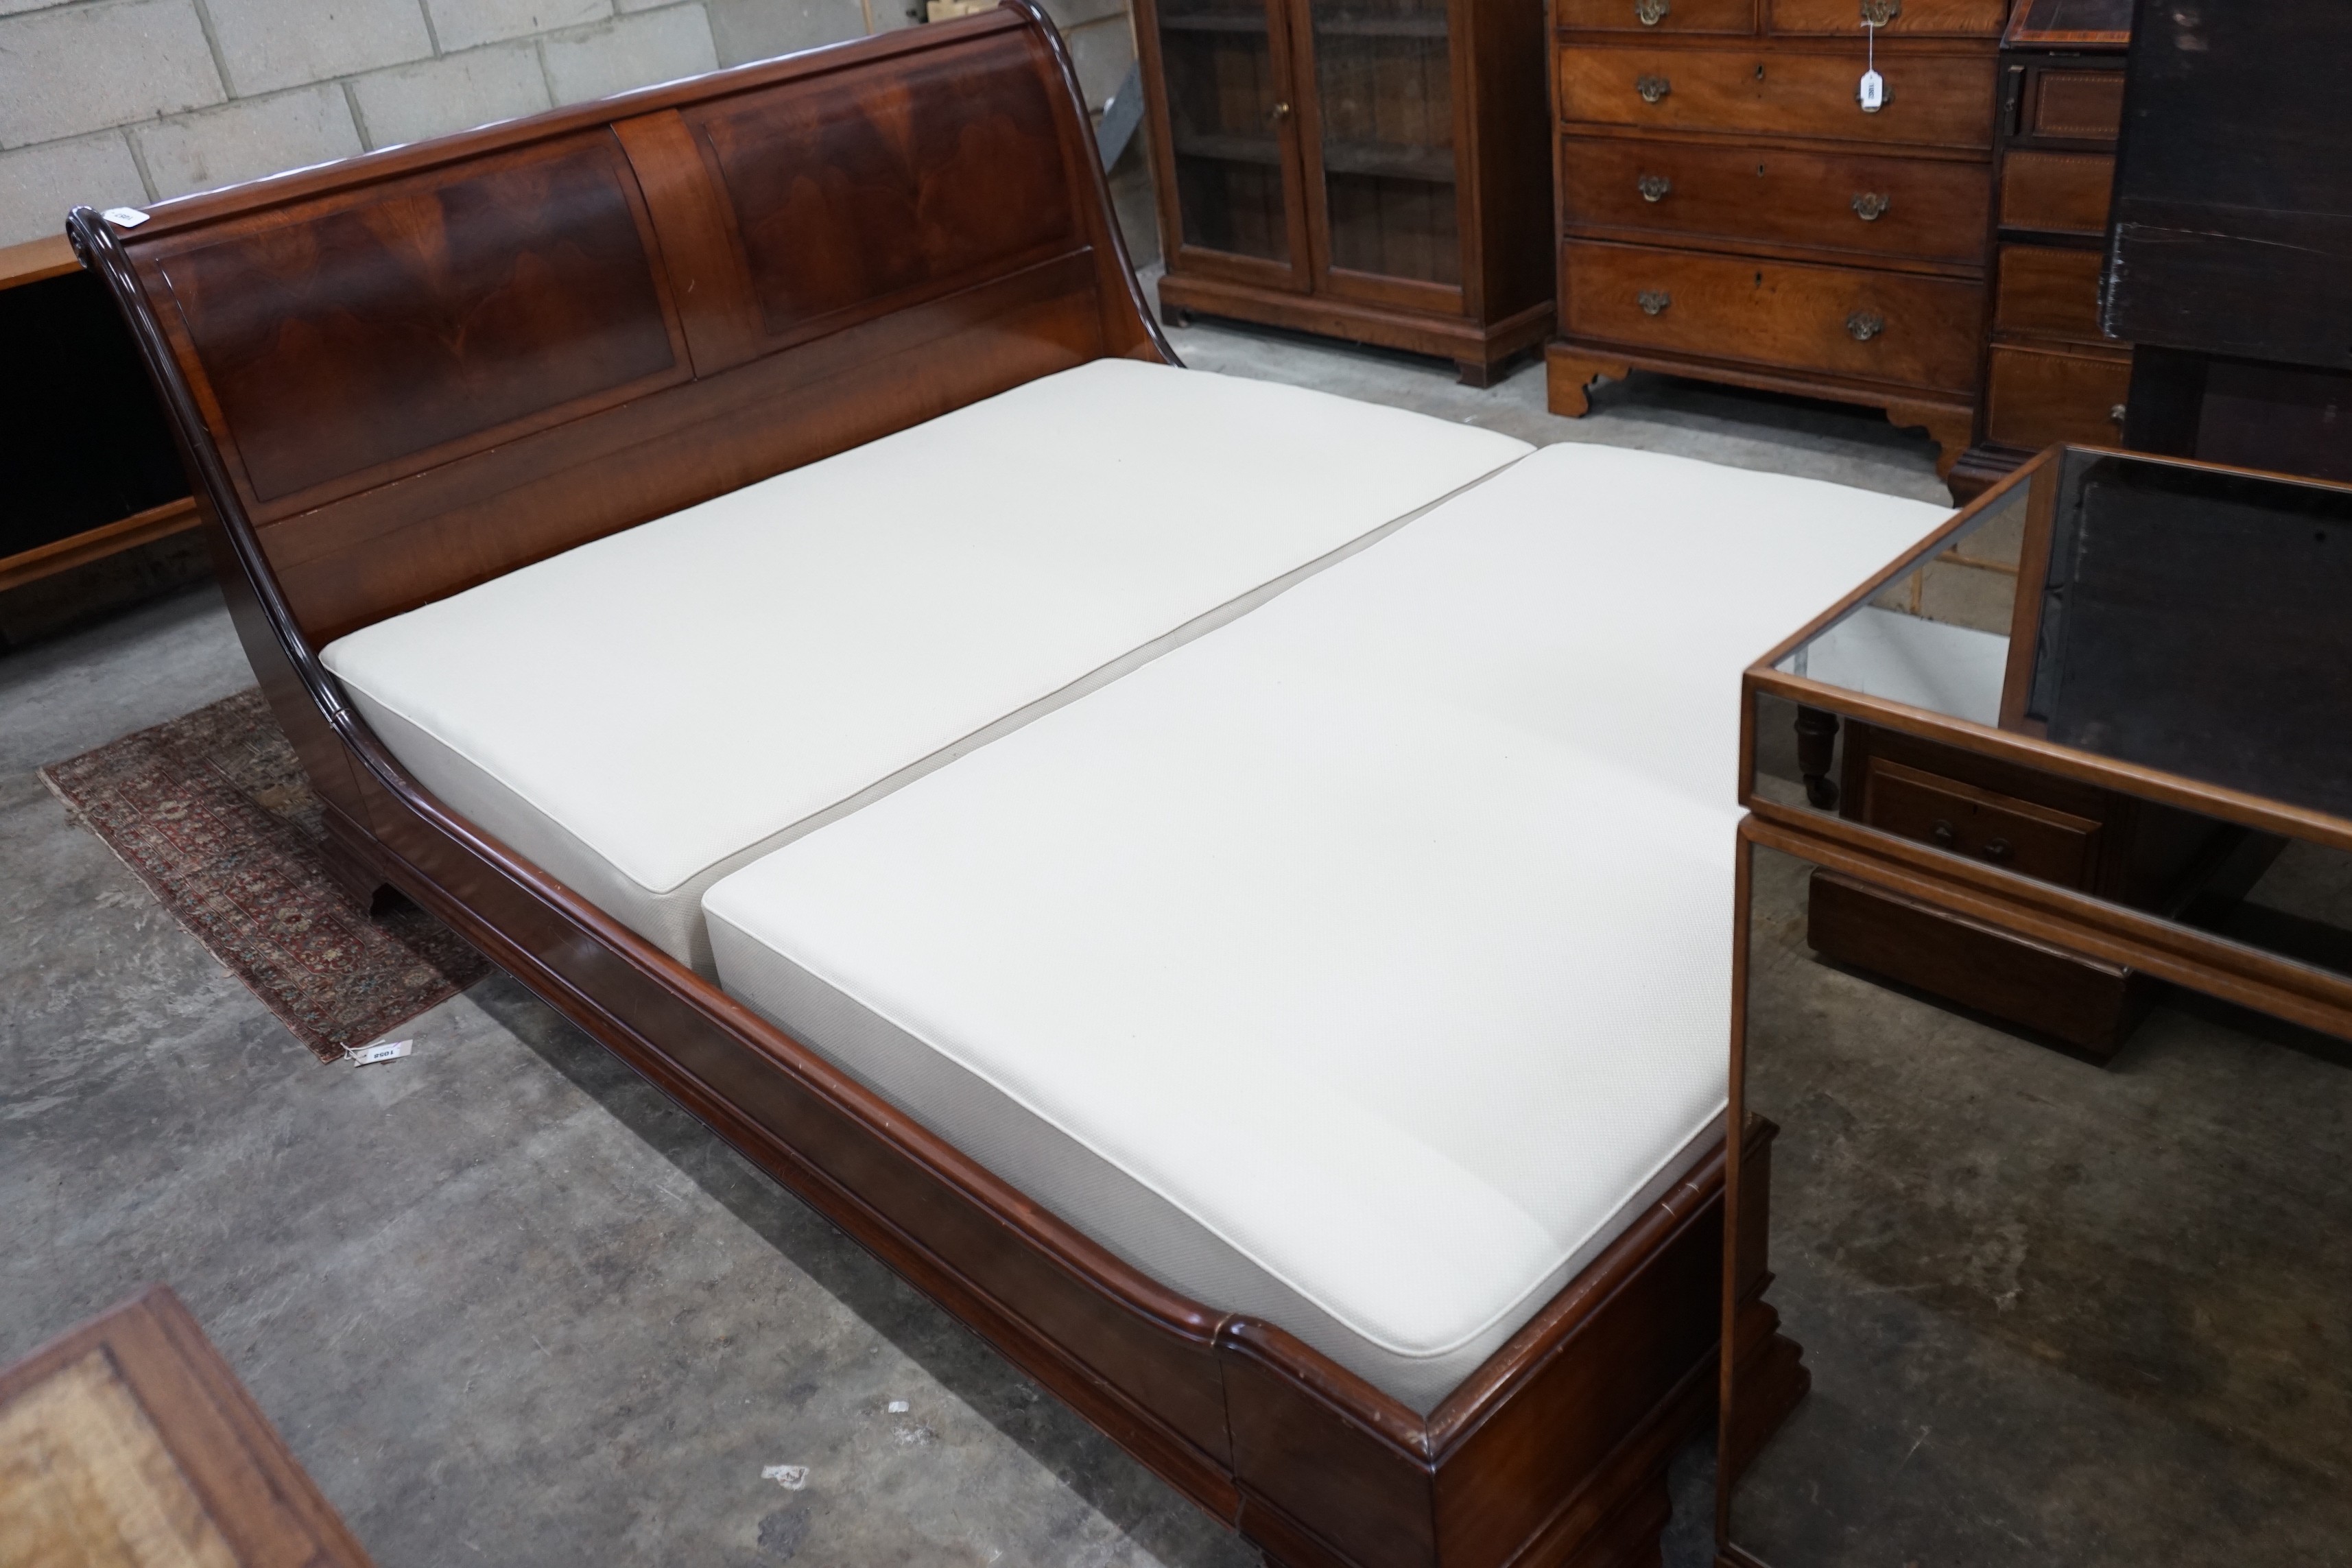 An 'And So To Bed' mahogany kingsize sleigh bed with Prestige two section divan base, width 161cms, length 224cms, height 100cms